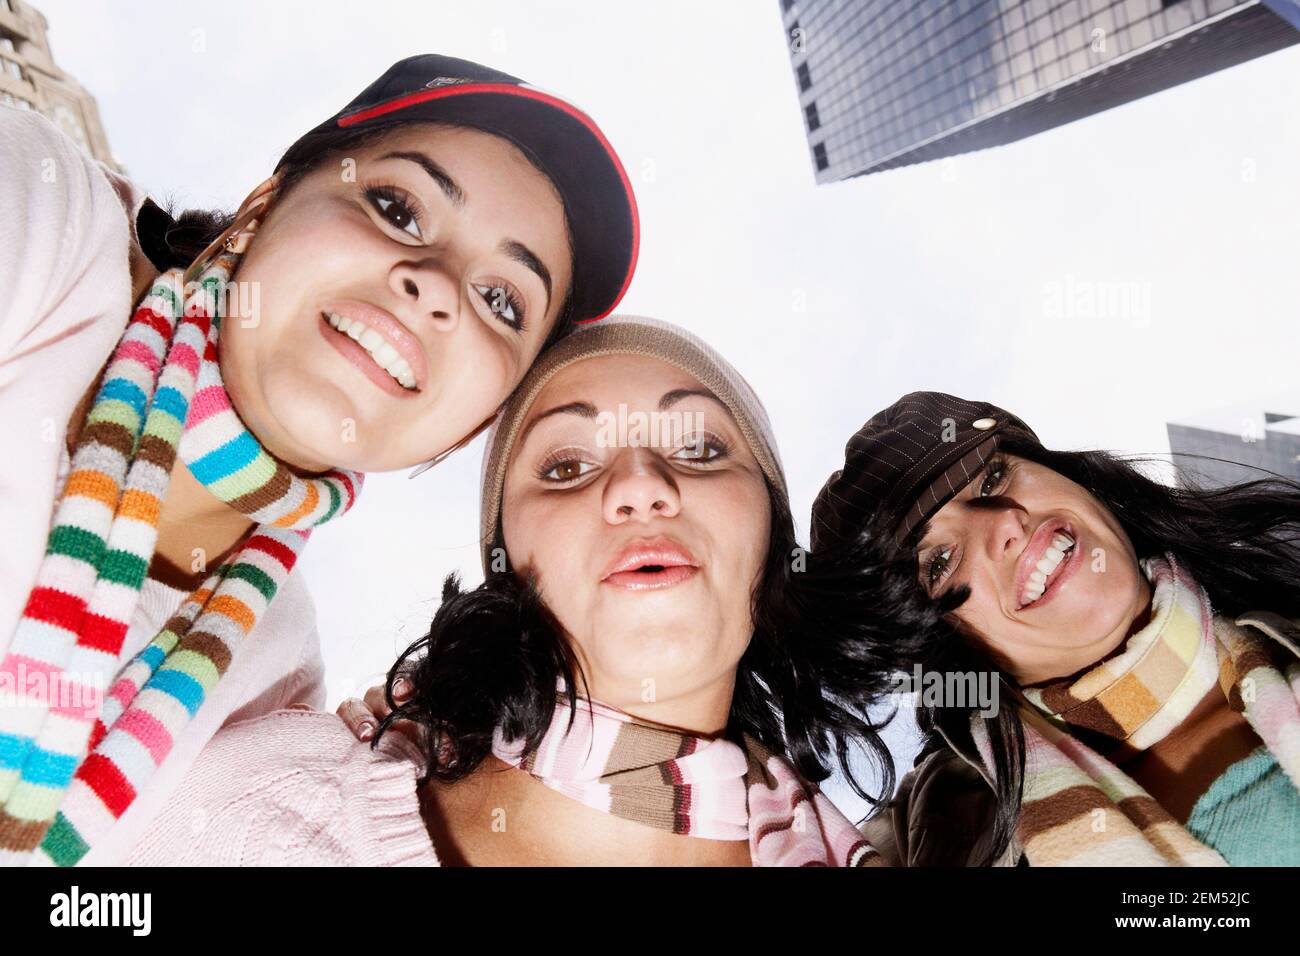 Low angle view of two young women and a mid adult woman smiling Stock Photo